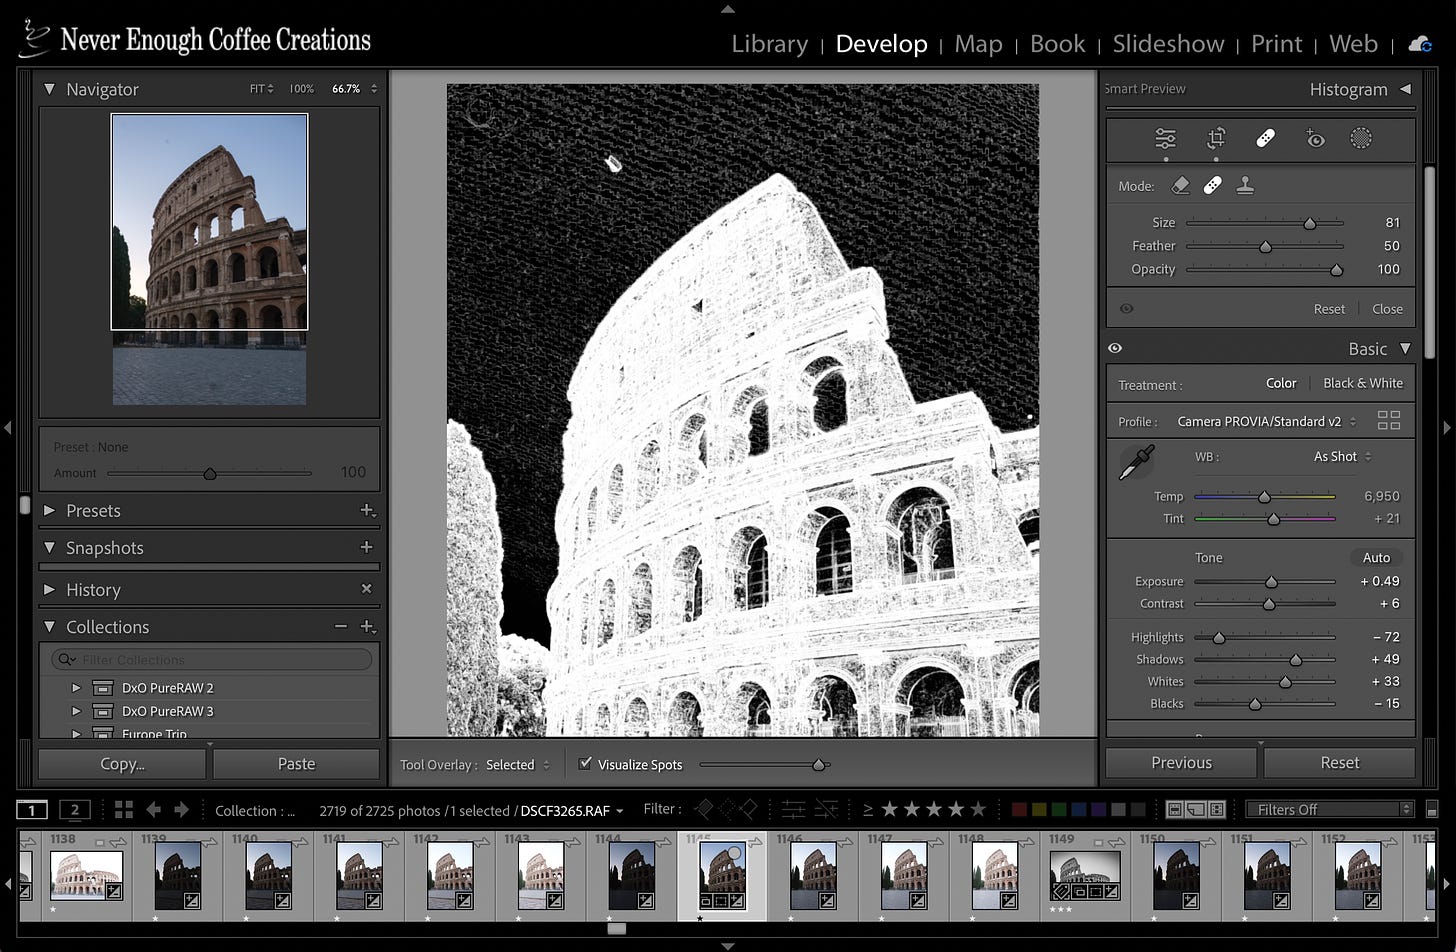 A Lightroom Classic window showing a photo of the Colosseum in Rome with the Visualize Spots feature turned on to make it easier to find areas that need to be erased.